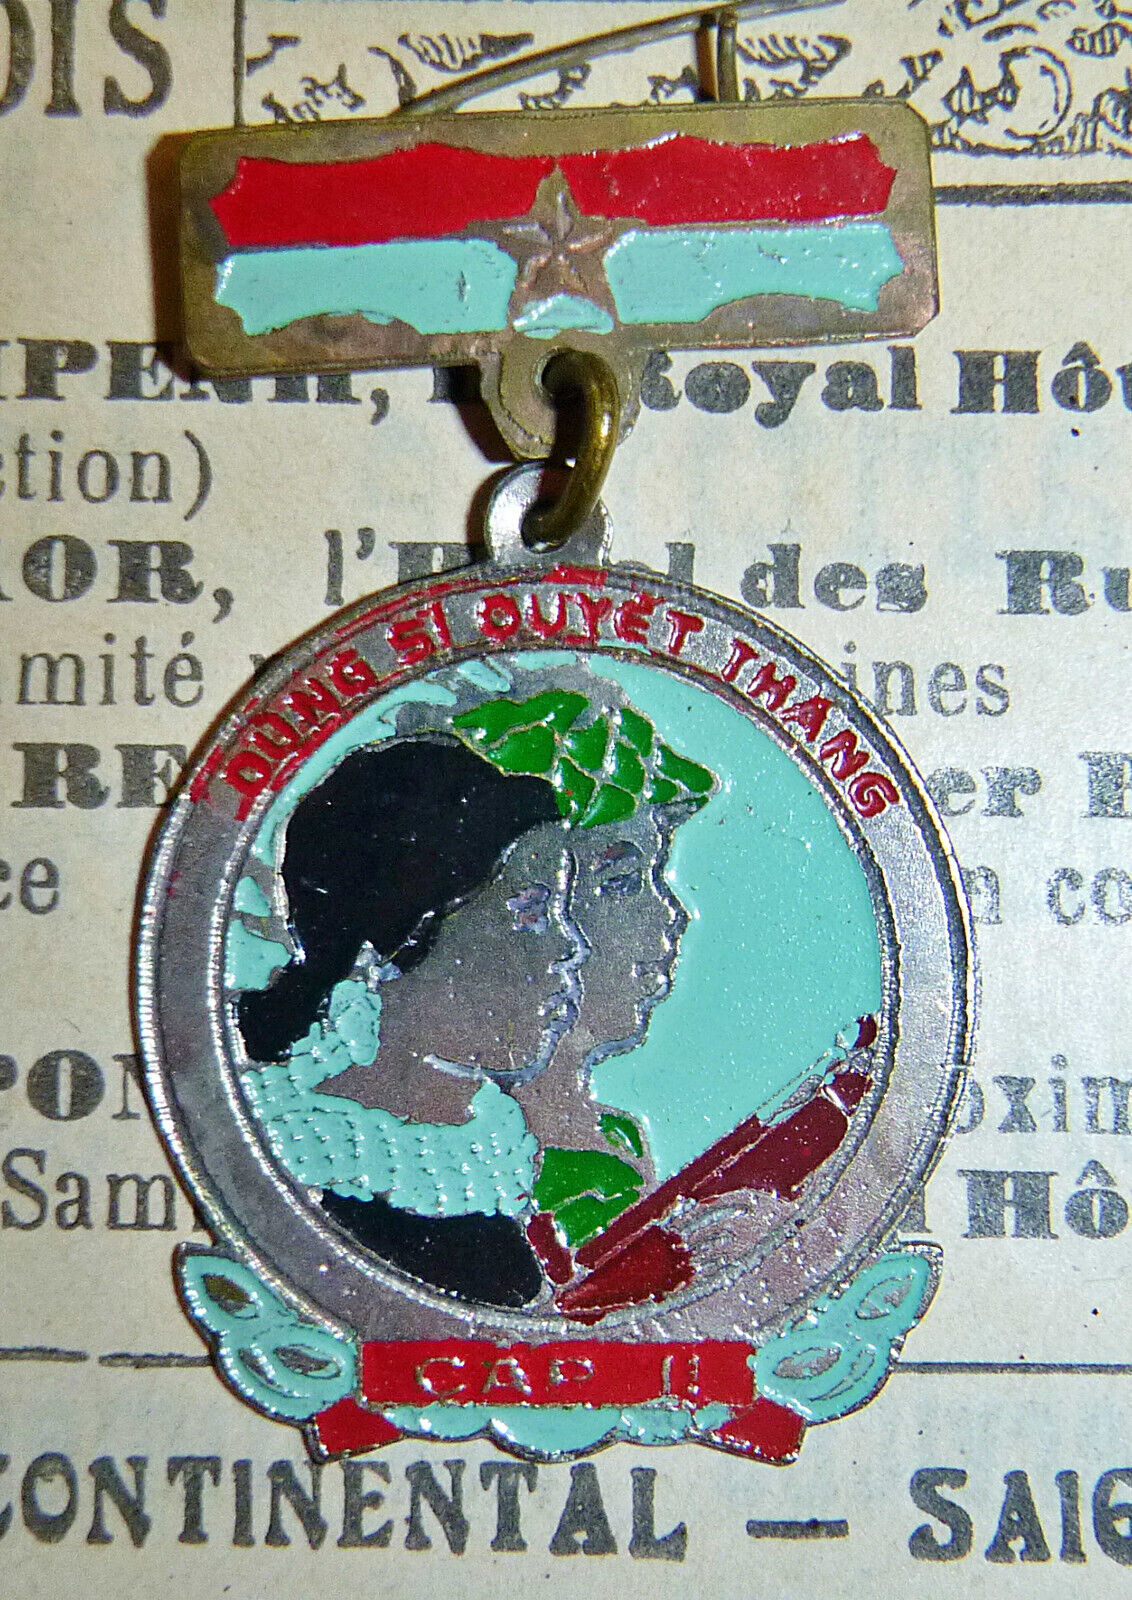 VC MEDAL - HEROES DETERMINED FOR VICTORY - VIET CONG - NLF - Vietnam War - C.205